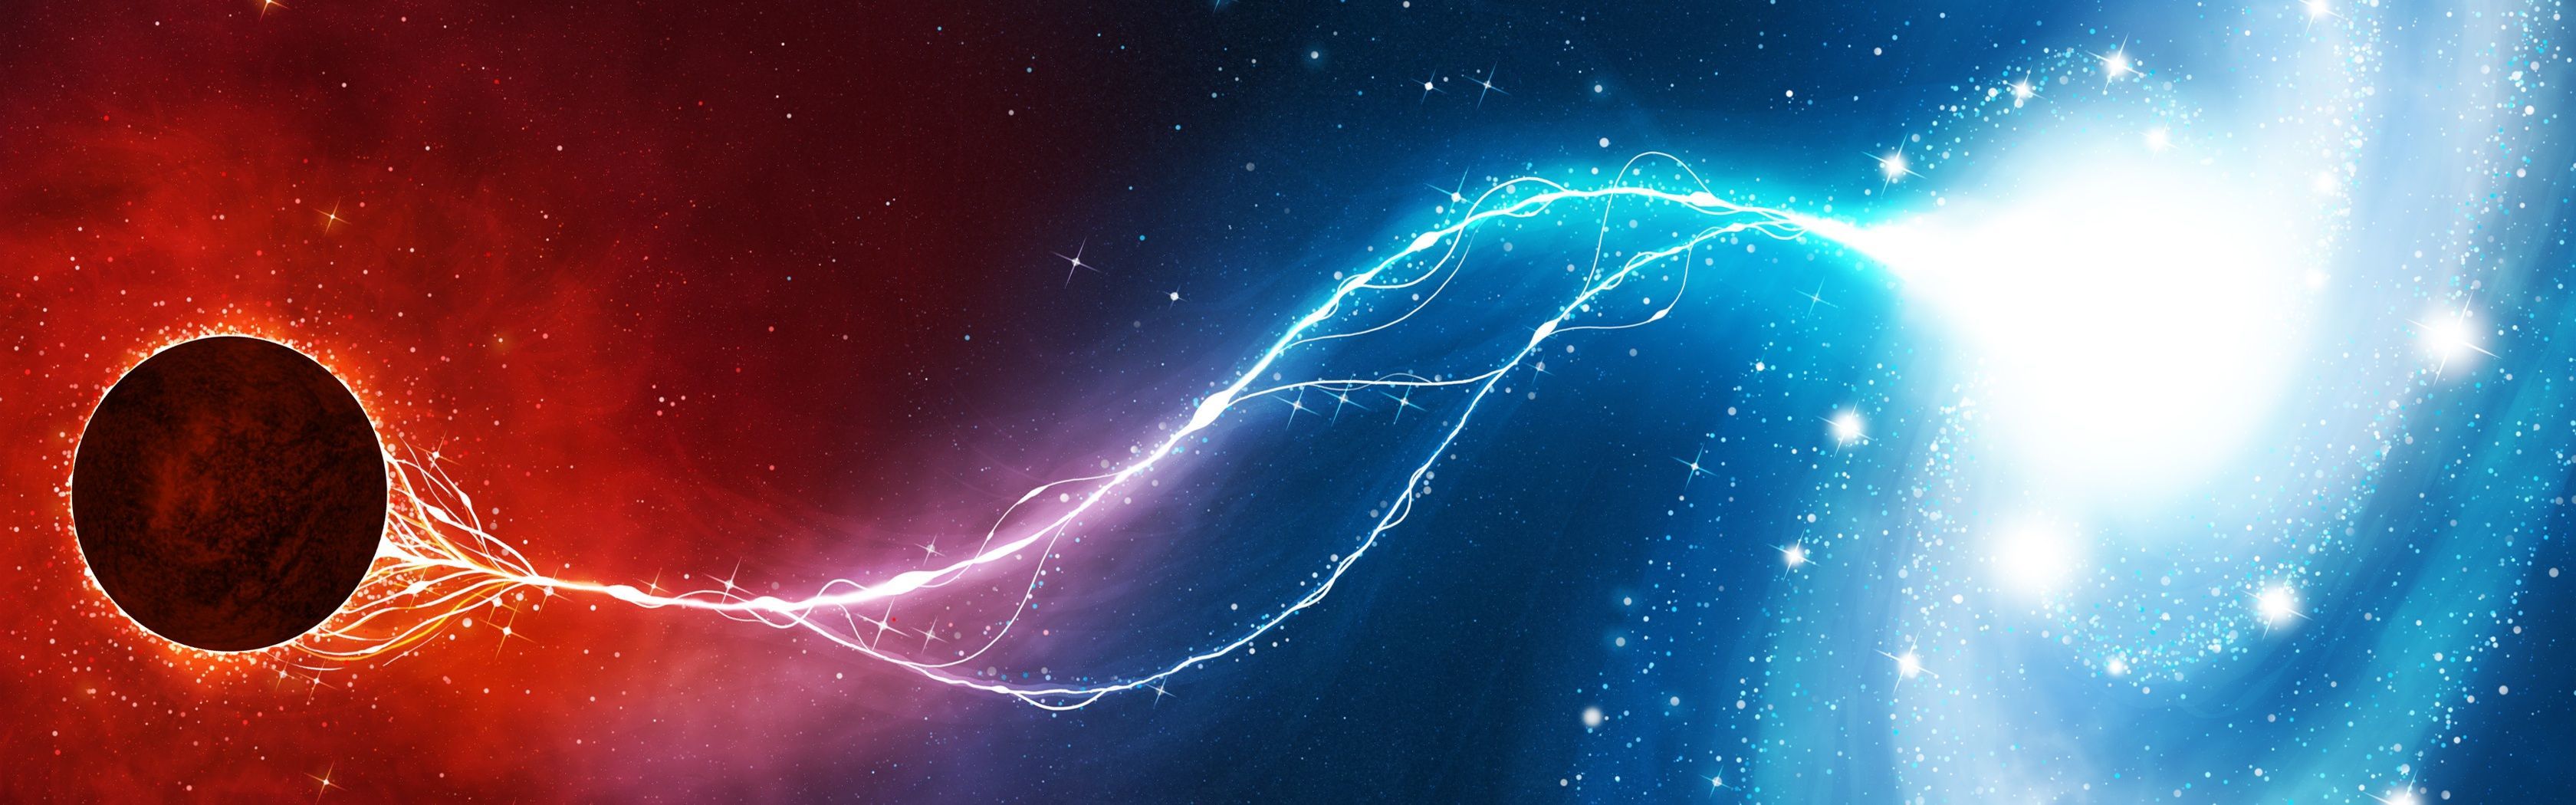 Abstract Space Dual Screen Wallpaper | 3360x1050 | ID:48201